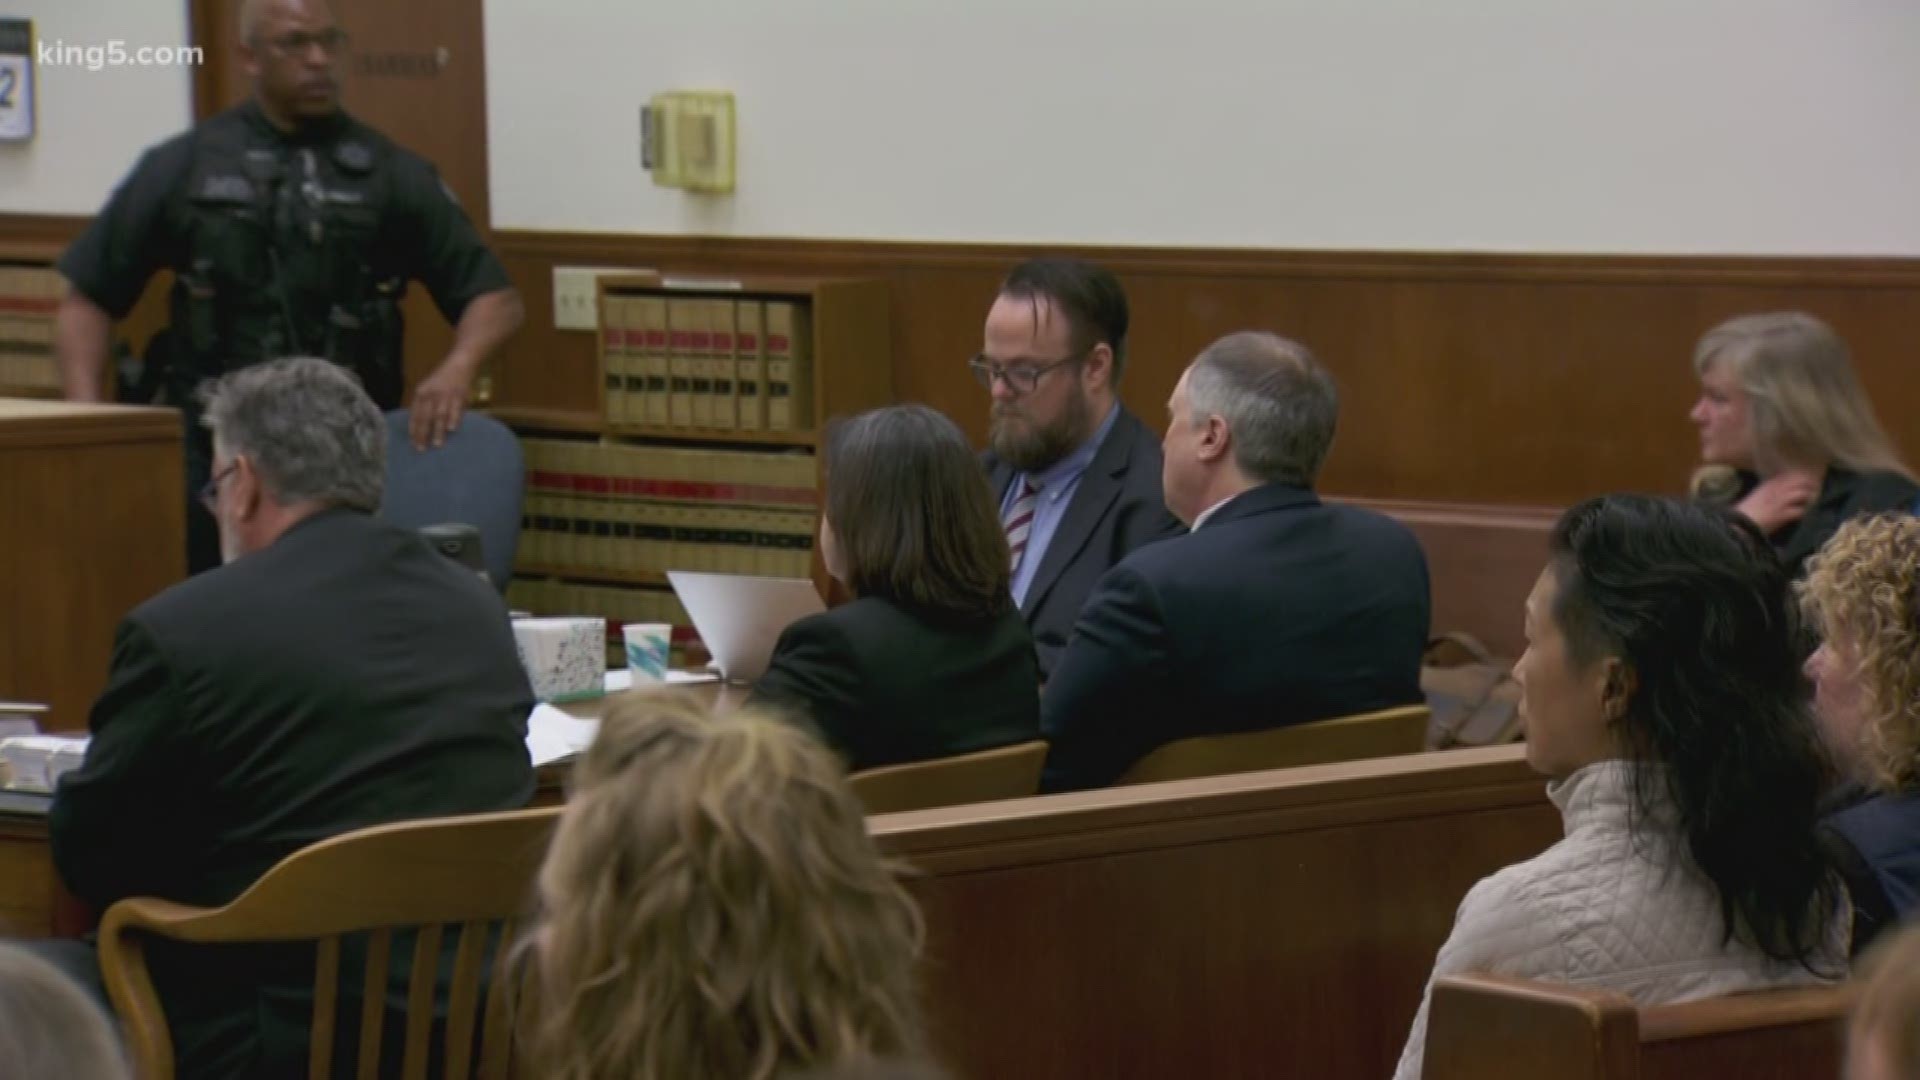 The Cold Case murder trial of Timothy Bass is now in the hands of a Whatcom County Jury. Closing arguments are underway in the nearly 30-year-old killing of an 18-year-old college student. DNA collected from a Coke can led to the arrest of the defendant, but is it enough to convict? KING 5's Eric Wilkinson reports.